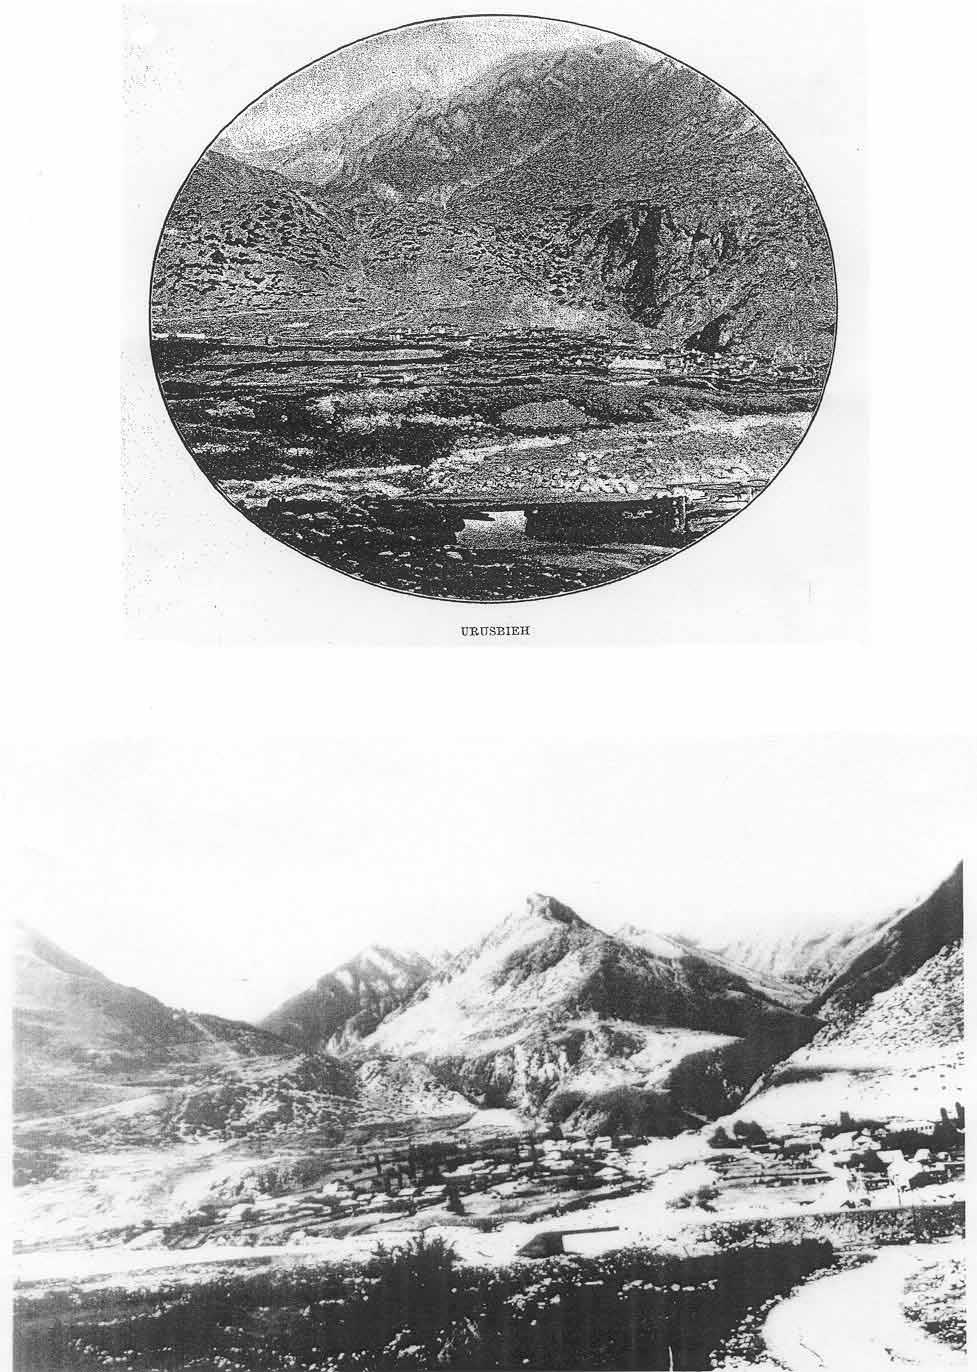 Plates Plate 1aThe Caucasian village of Urusbieh in a 19th century photograph. From Freshfield 1896: II, fig. on p.